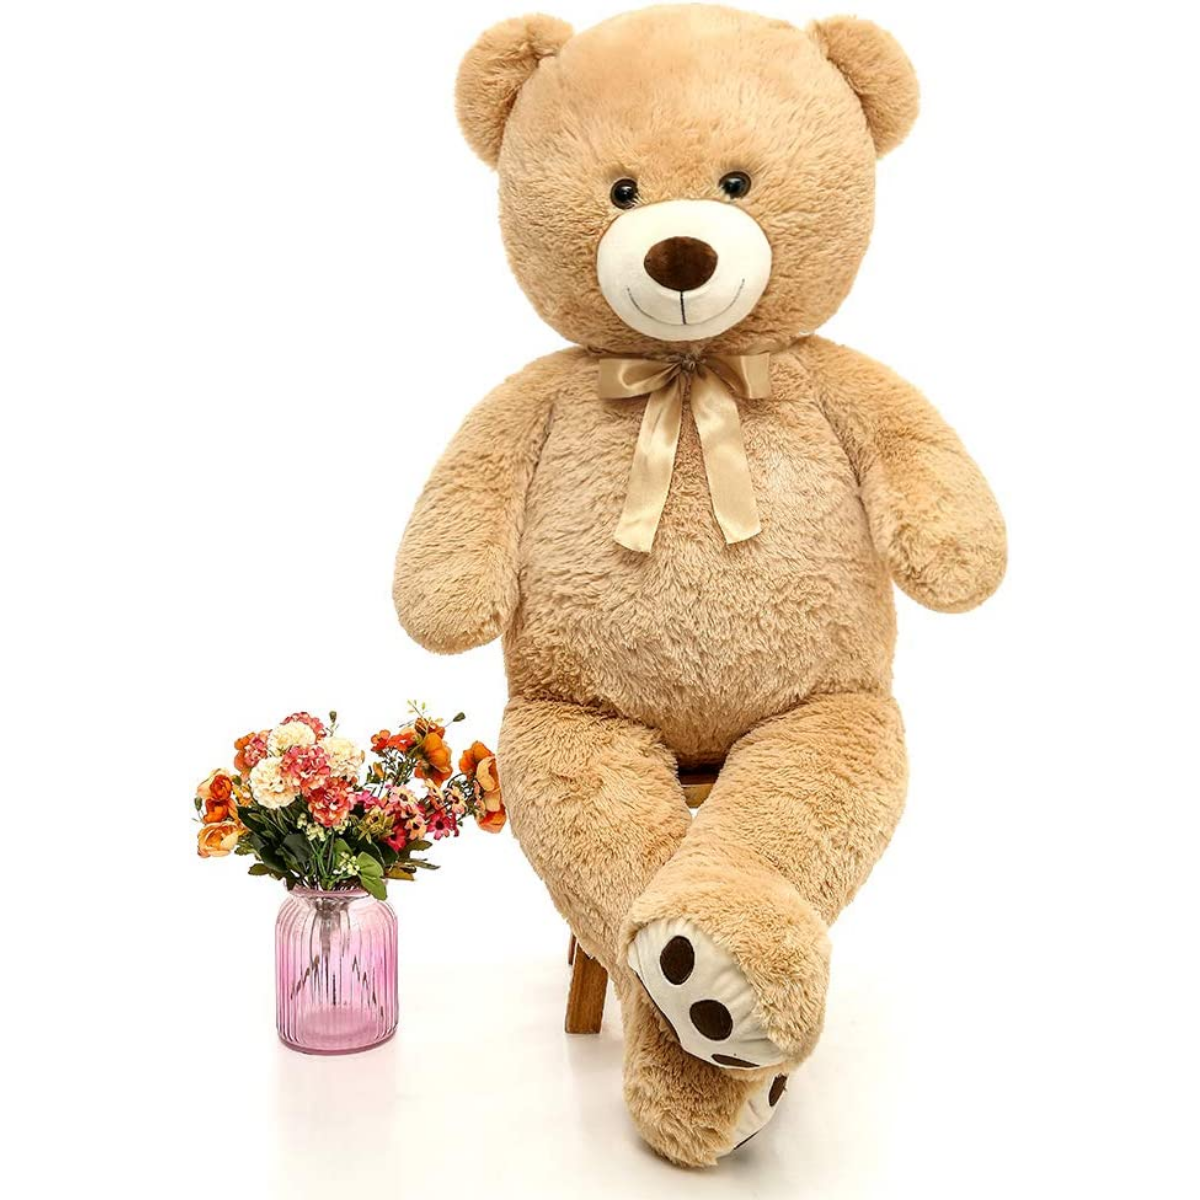 Giant Teddy Bear Plush Toy, Light Brown, 39/51 Inches